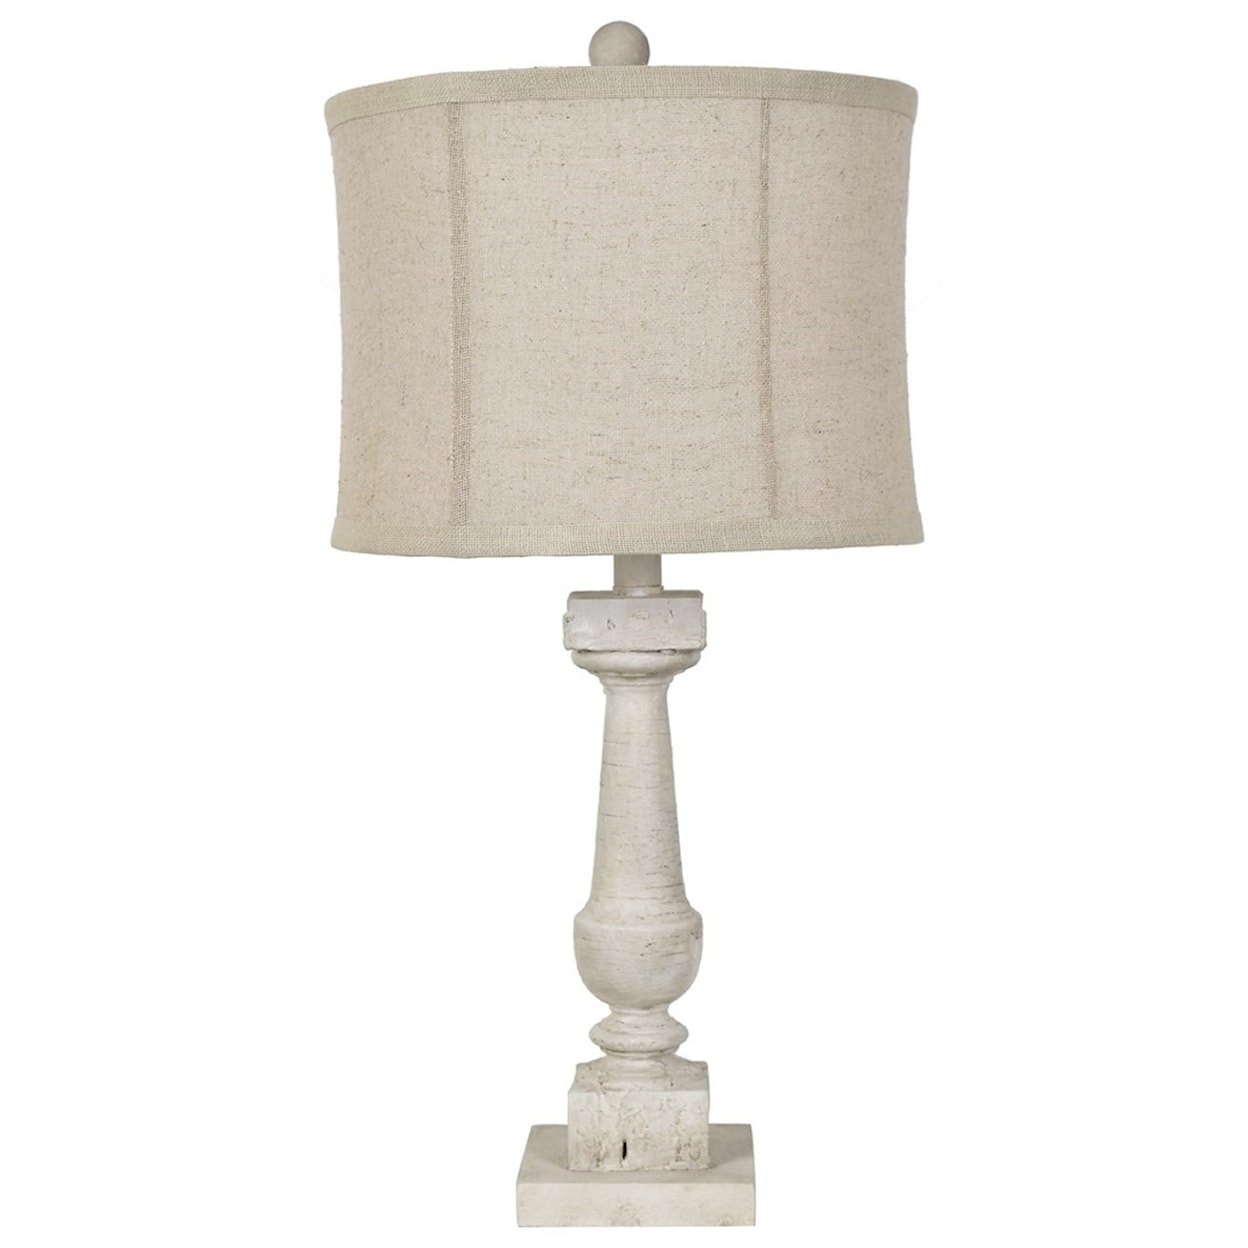 Crestview Collection Lighting Pearson Table Lamp